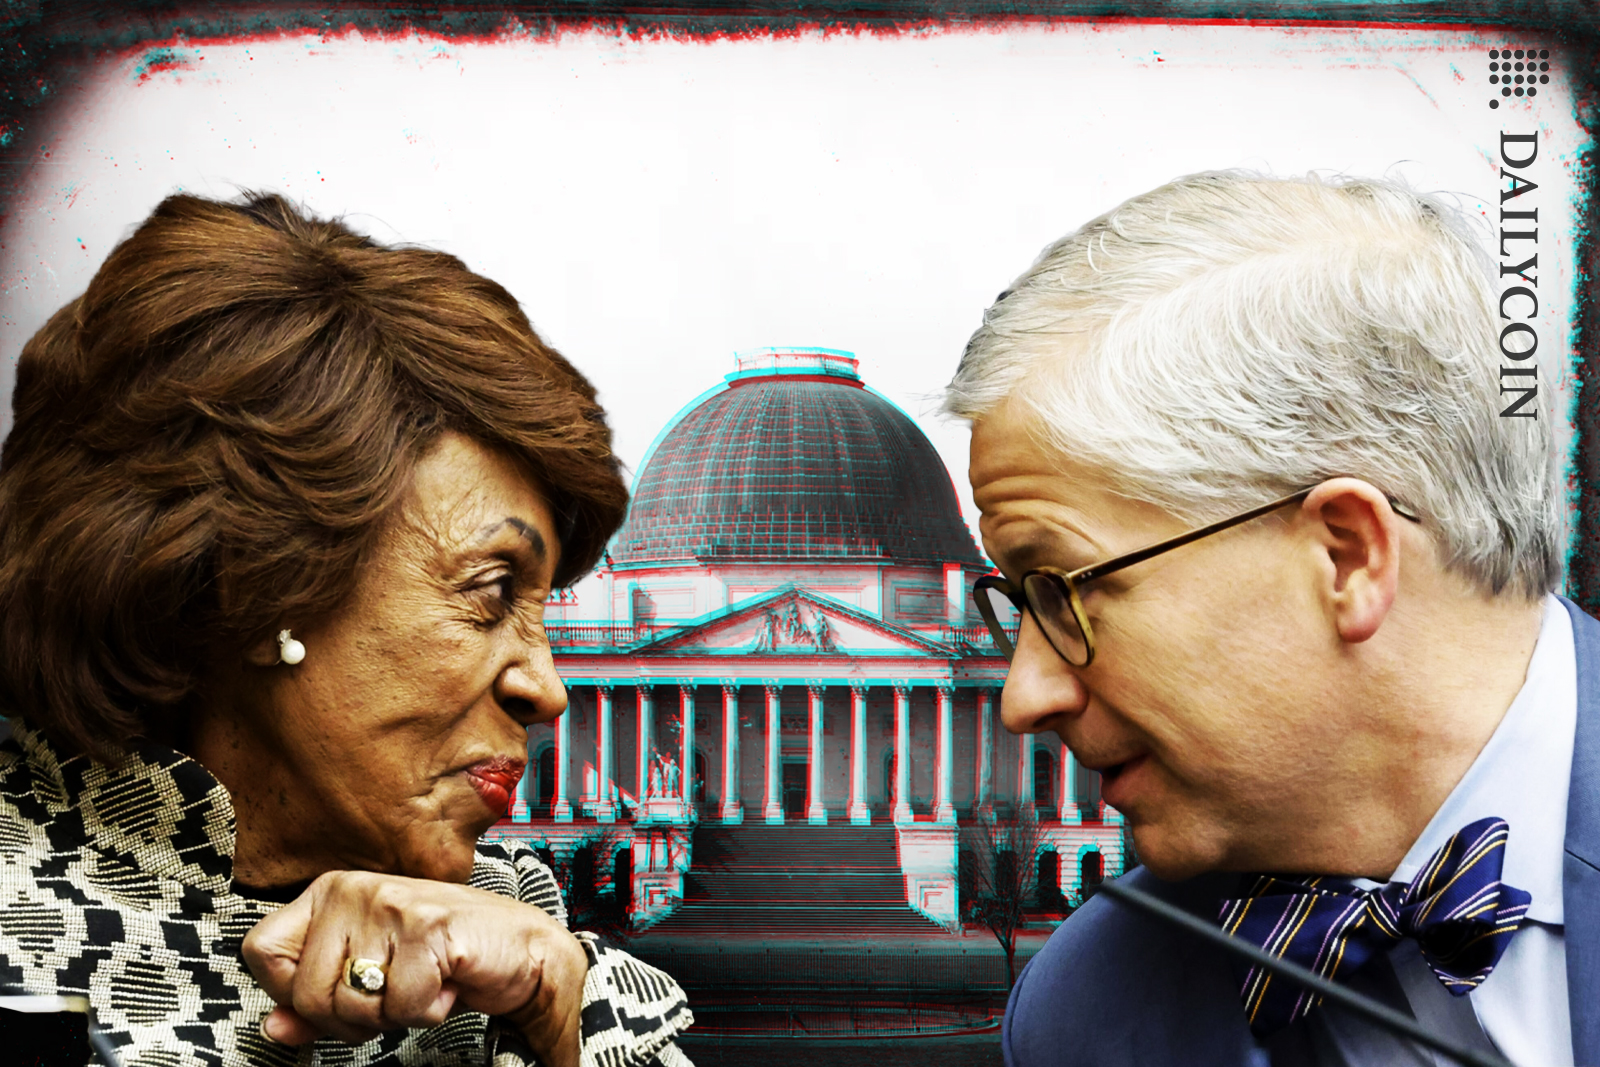 Maxine Waters and Patrick McHenry smiling at eachother, outside of a building process of the Capitol building.